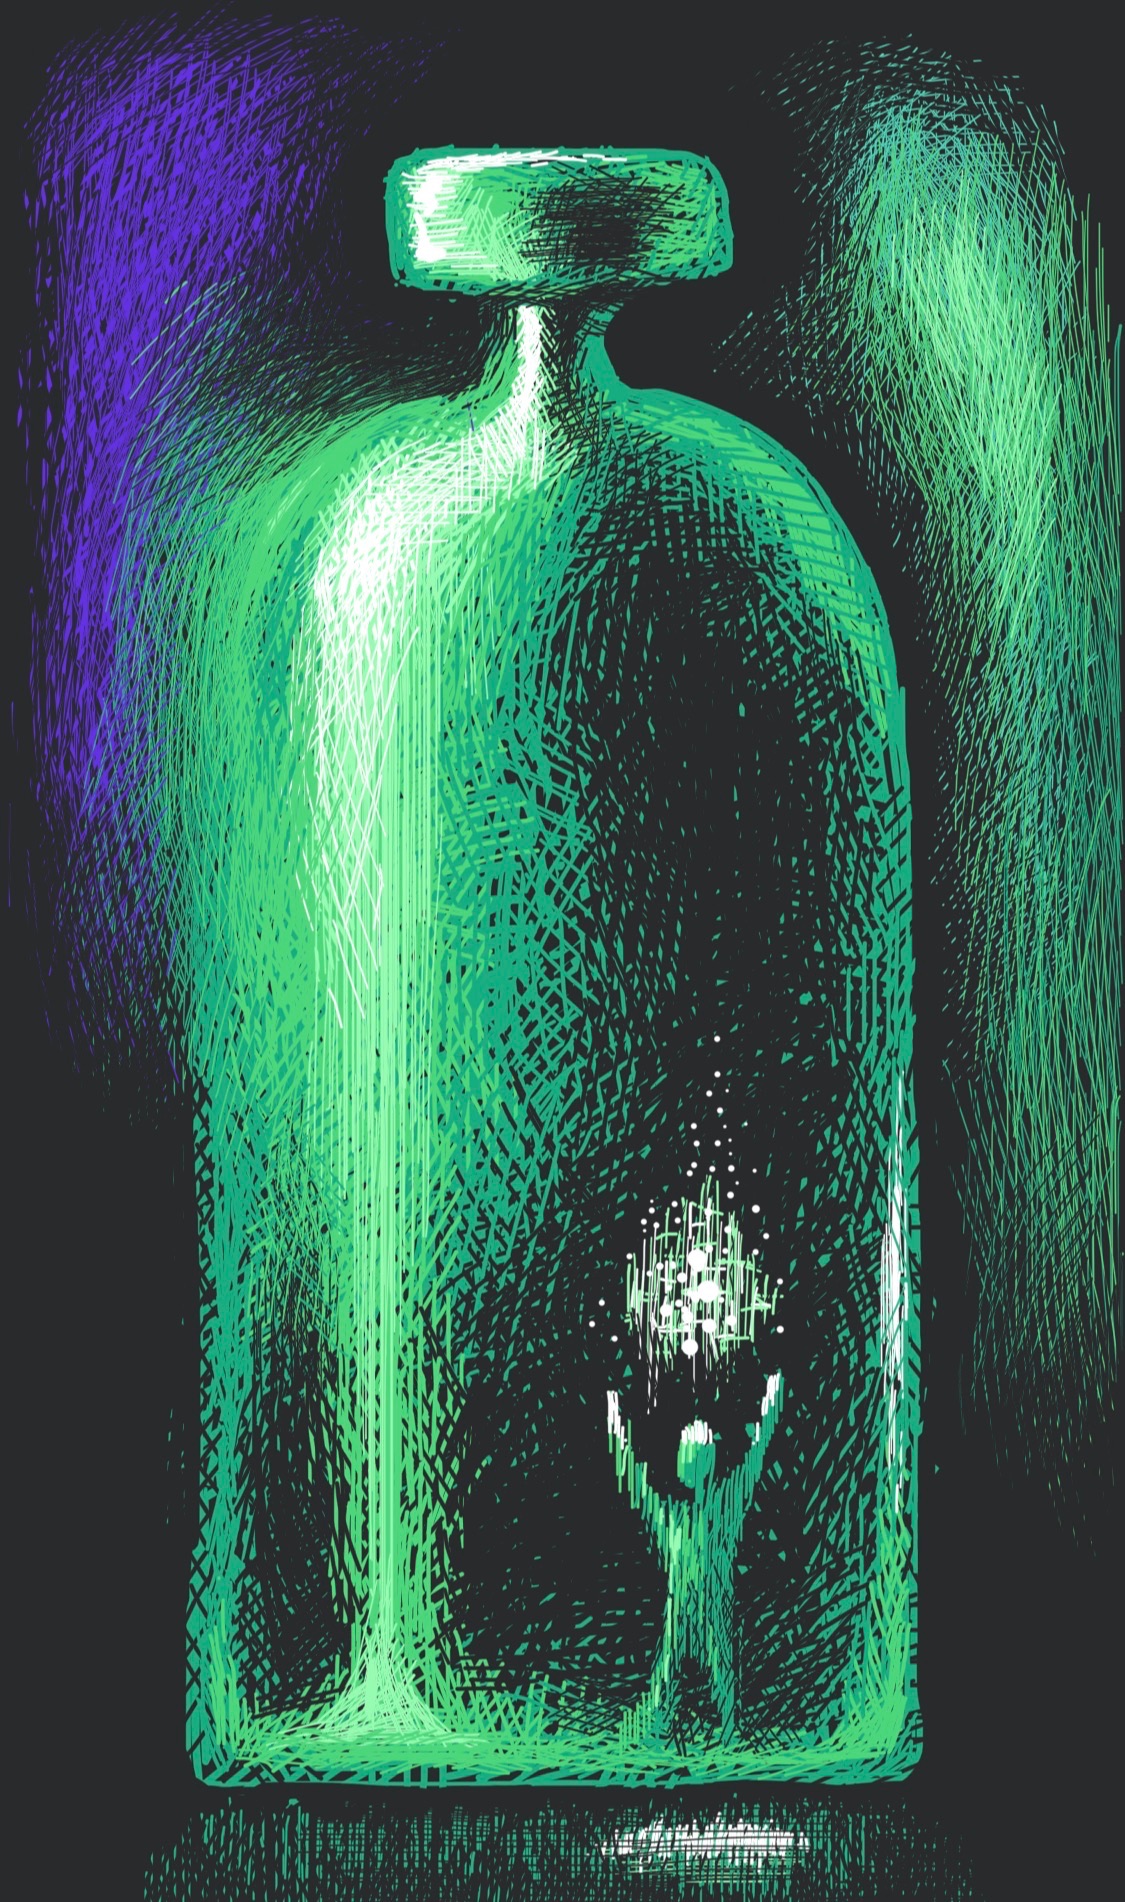 A glowing green bottle with someone standing inside, conjuring up a glowing cloud of sparkles